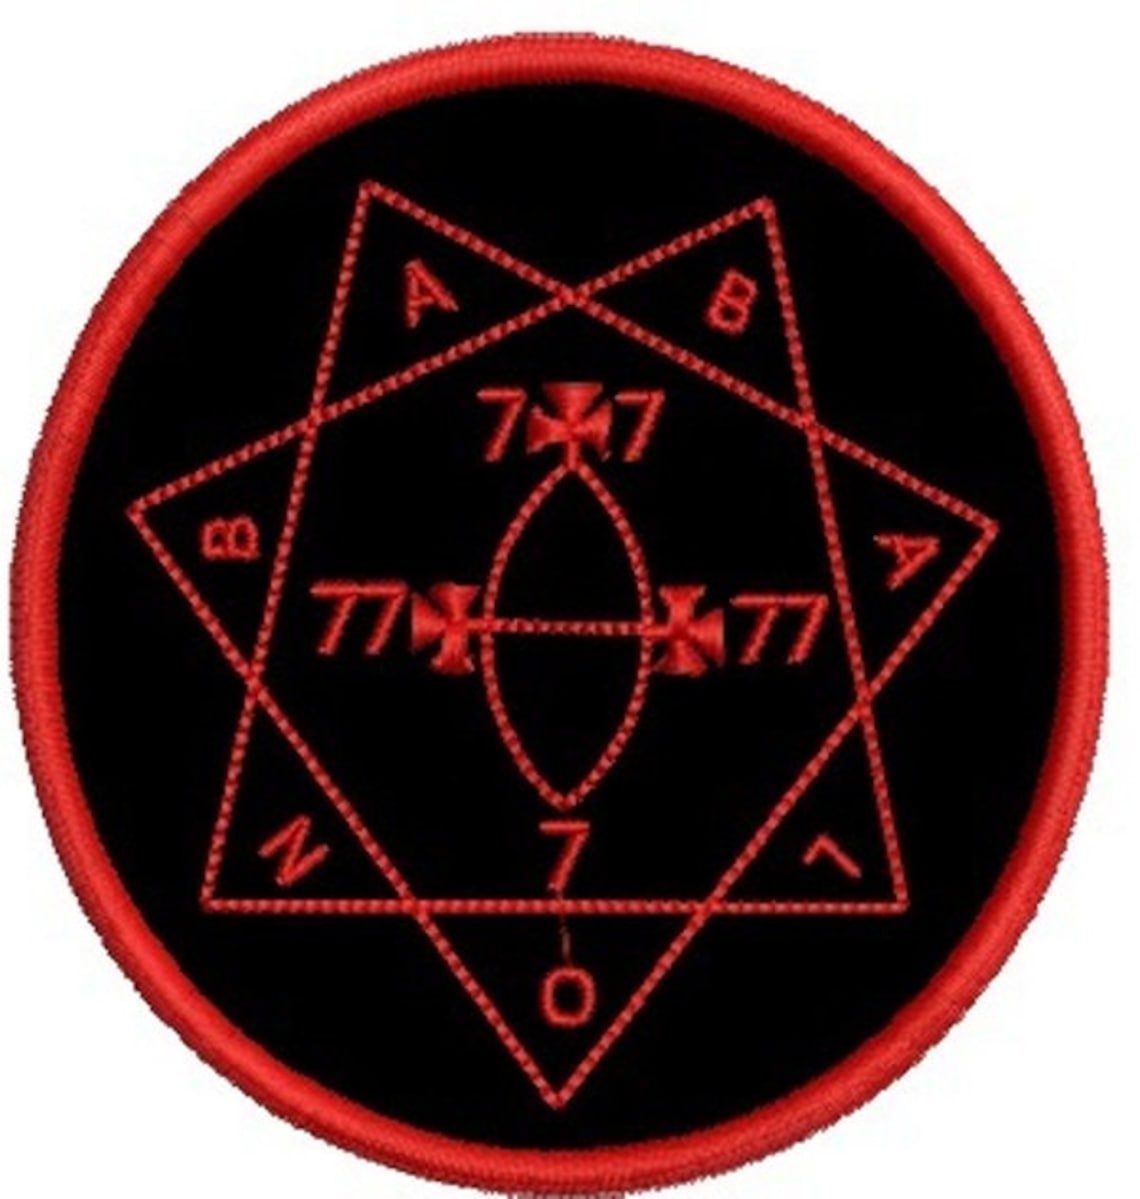 Babalon Symbol Embroidered Patch Occultism Thelema 777 Crowley - Etsy